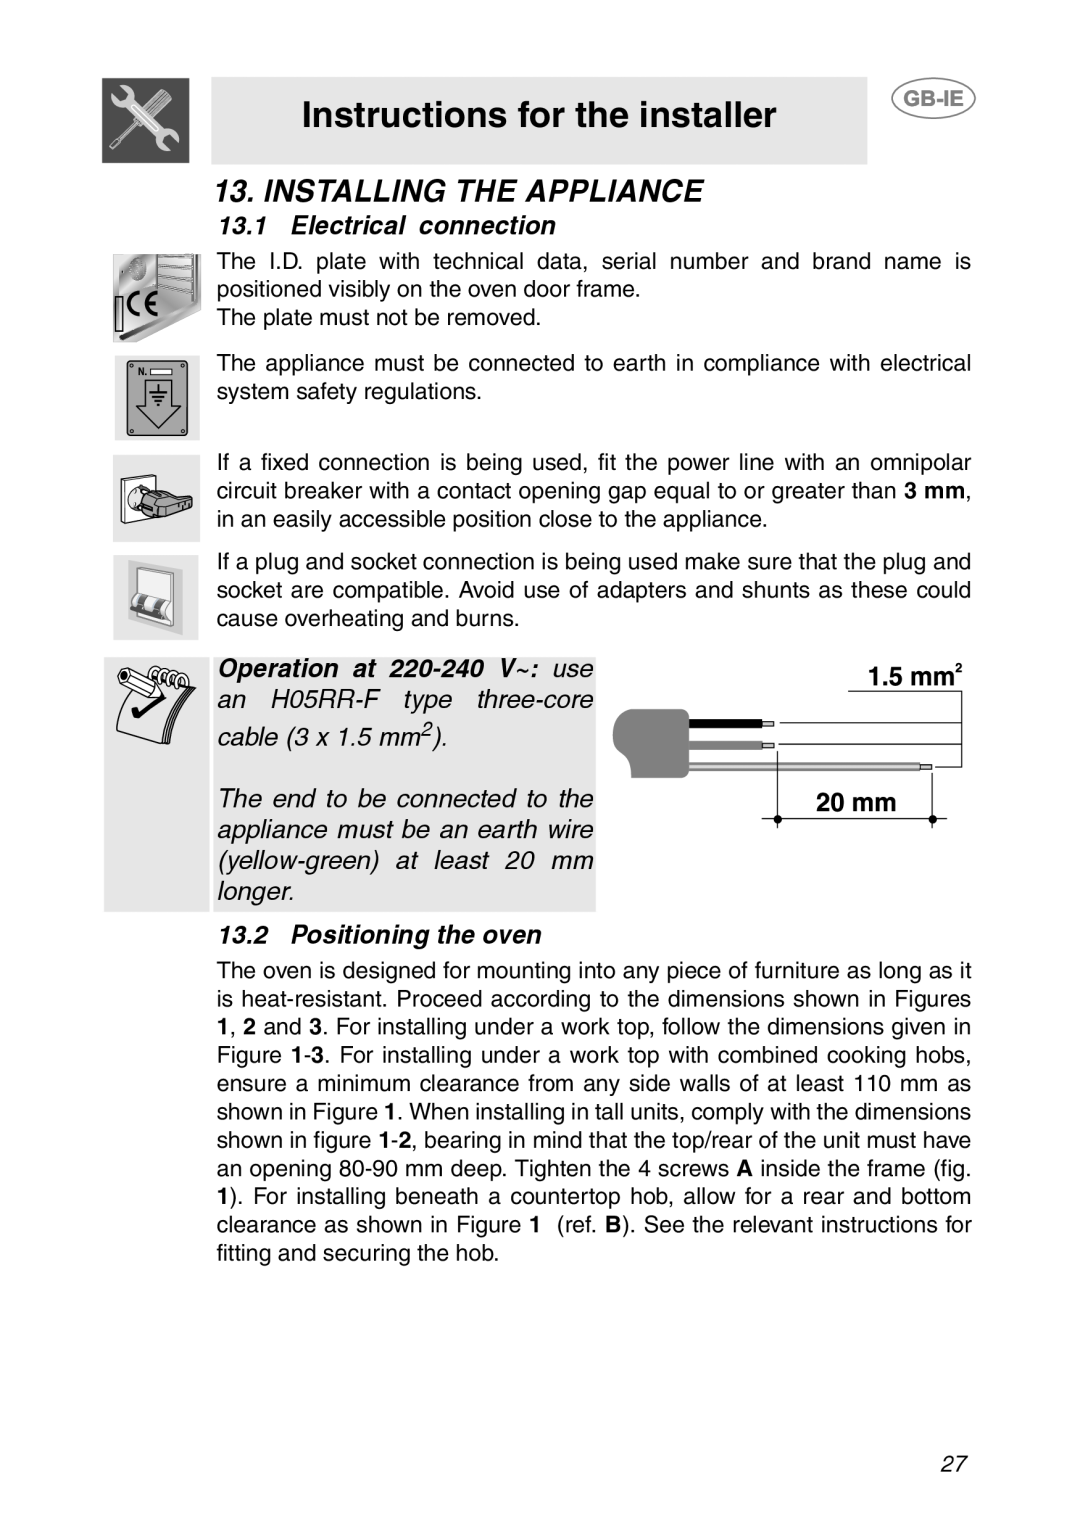 Smeg SCDK380X manual Instructions for the installer, Installing The Appliance, 13.1Electrical connection, cable 3 x 1.5 mm2 